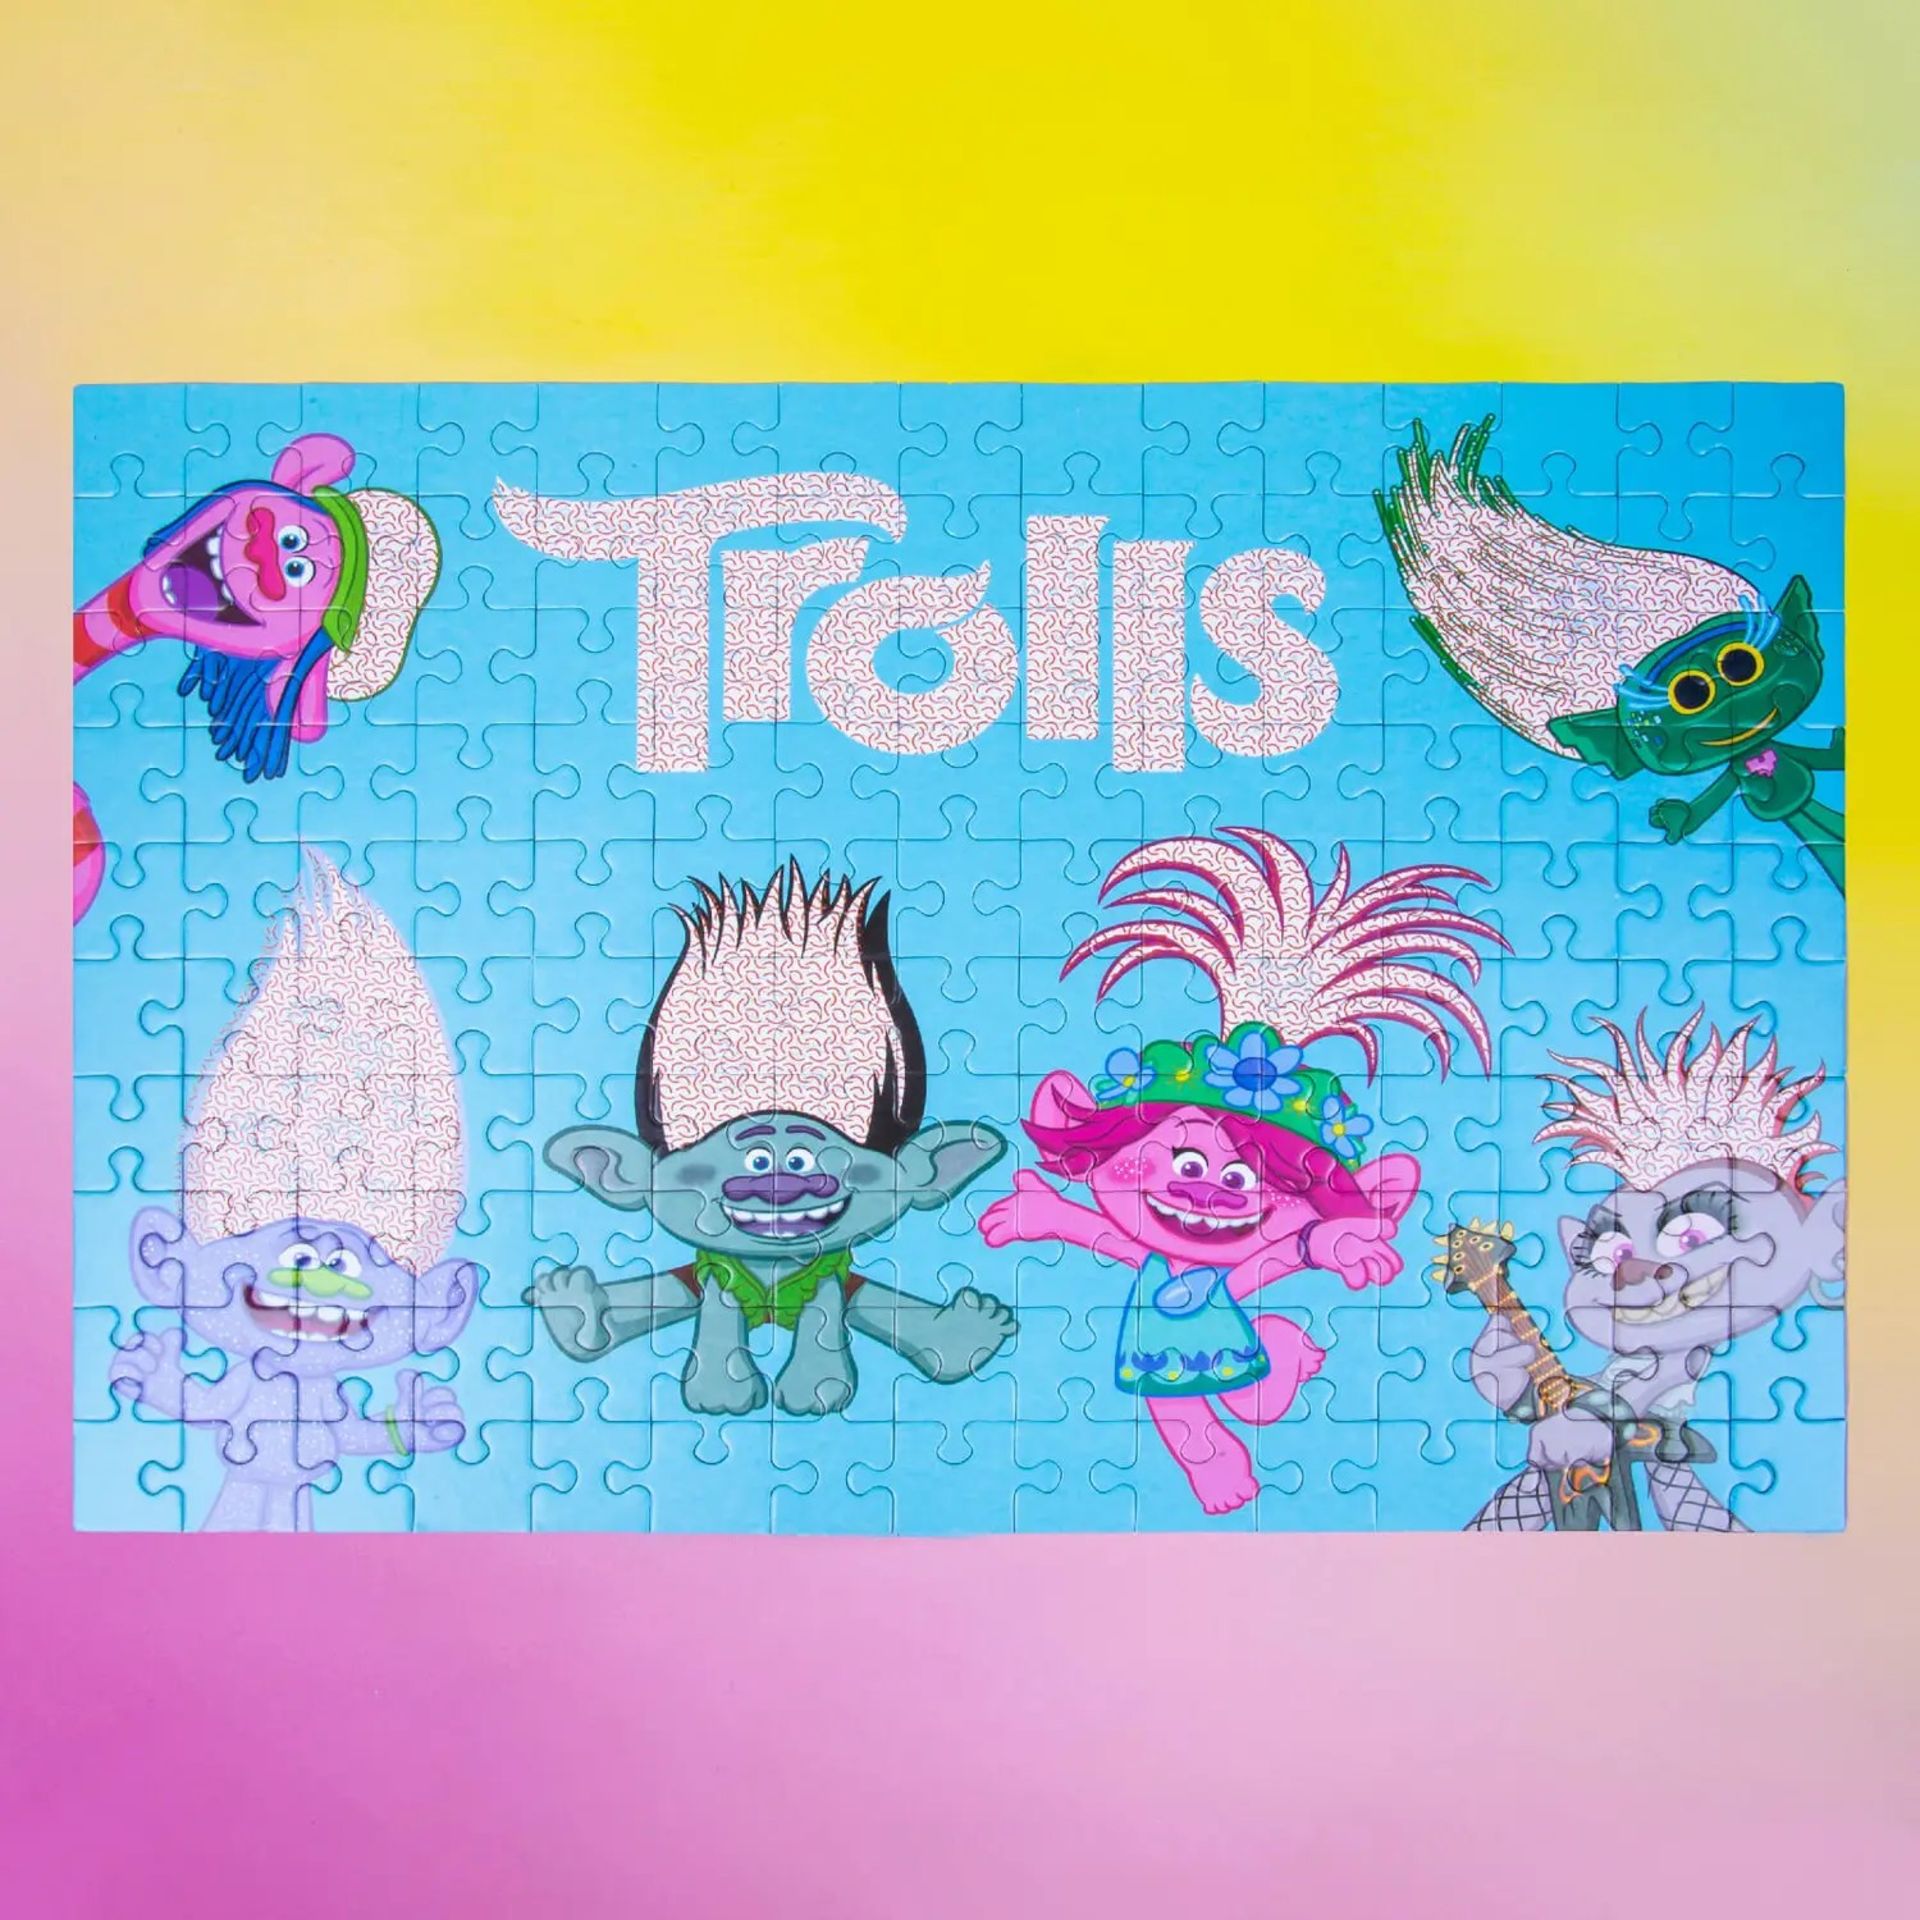 New Trolls Double Sided Mystery Jigsaw Puzzle - Image 2 of 2